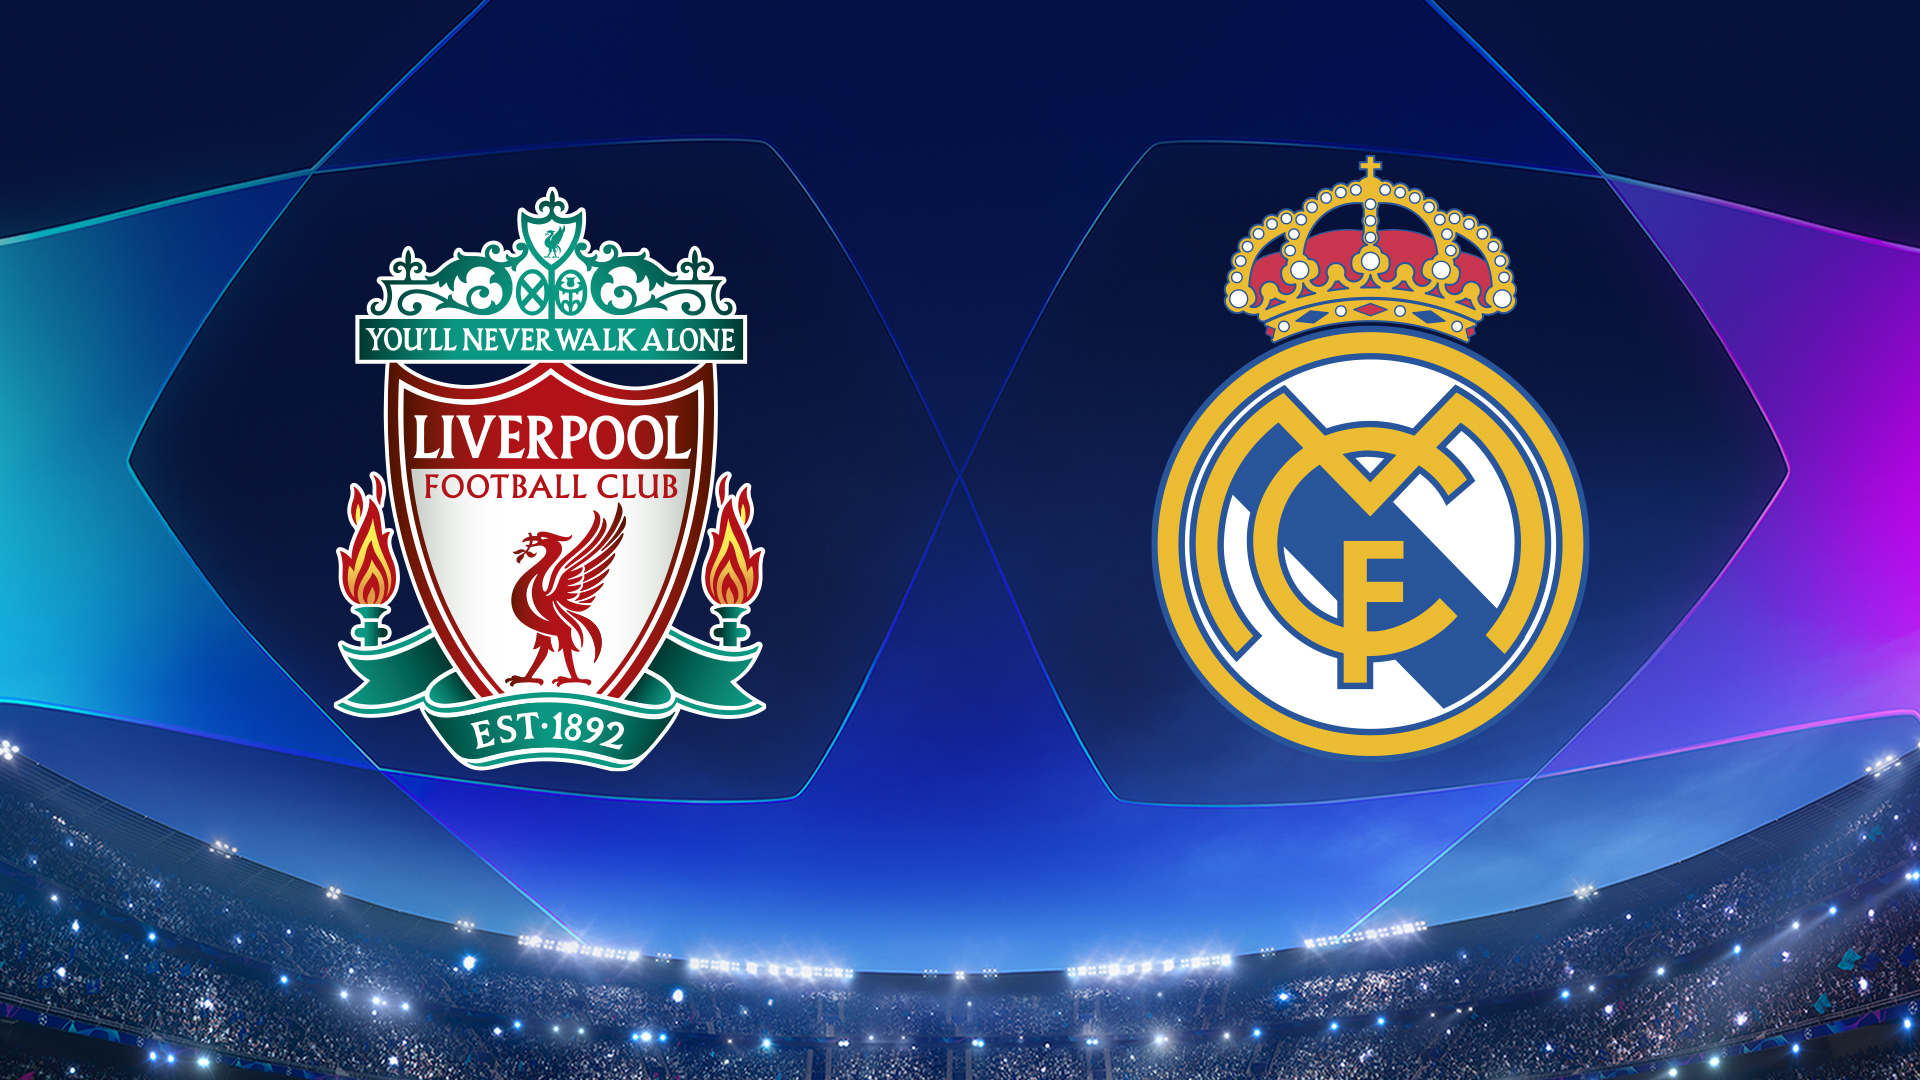 Watch UEFA Champions League Liverpool vs. Real Madrid Full show on